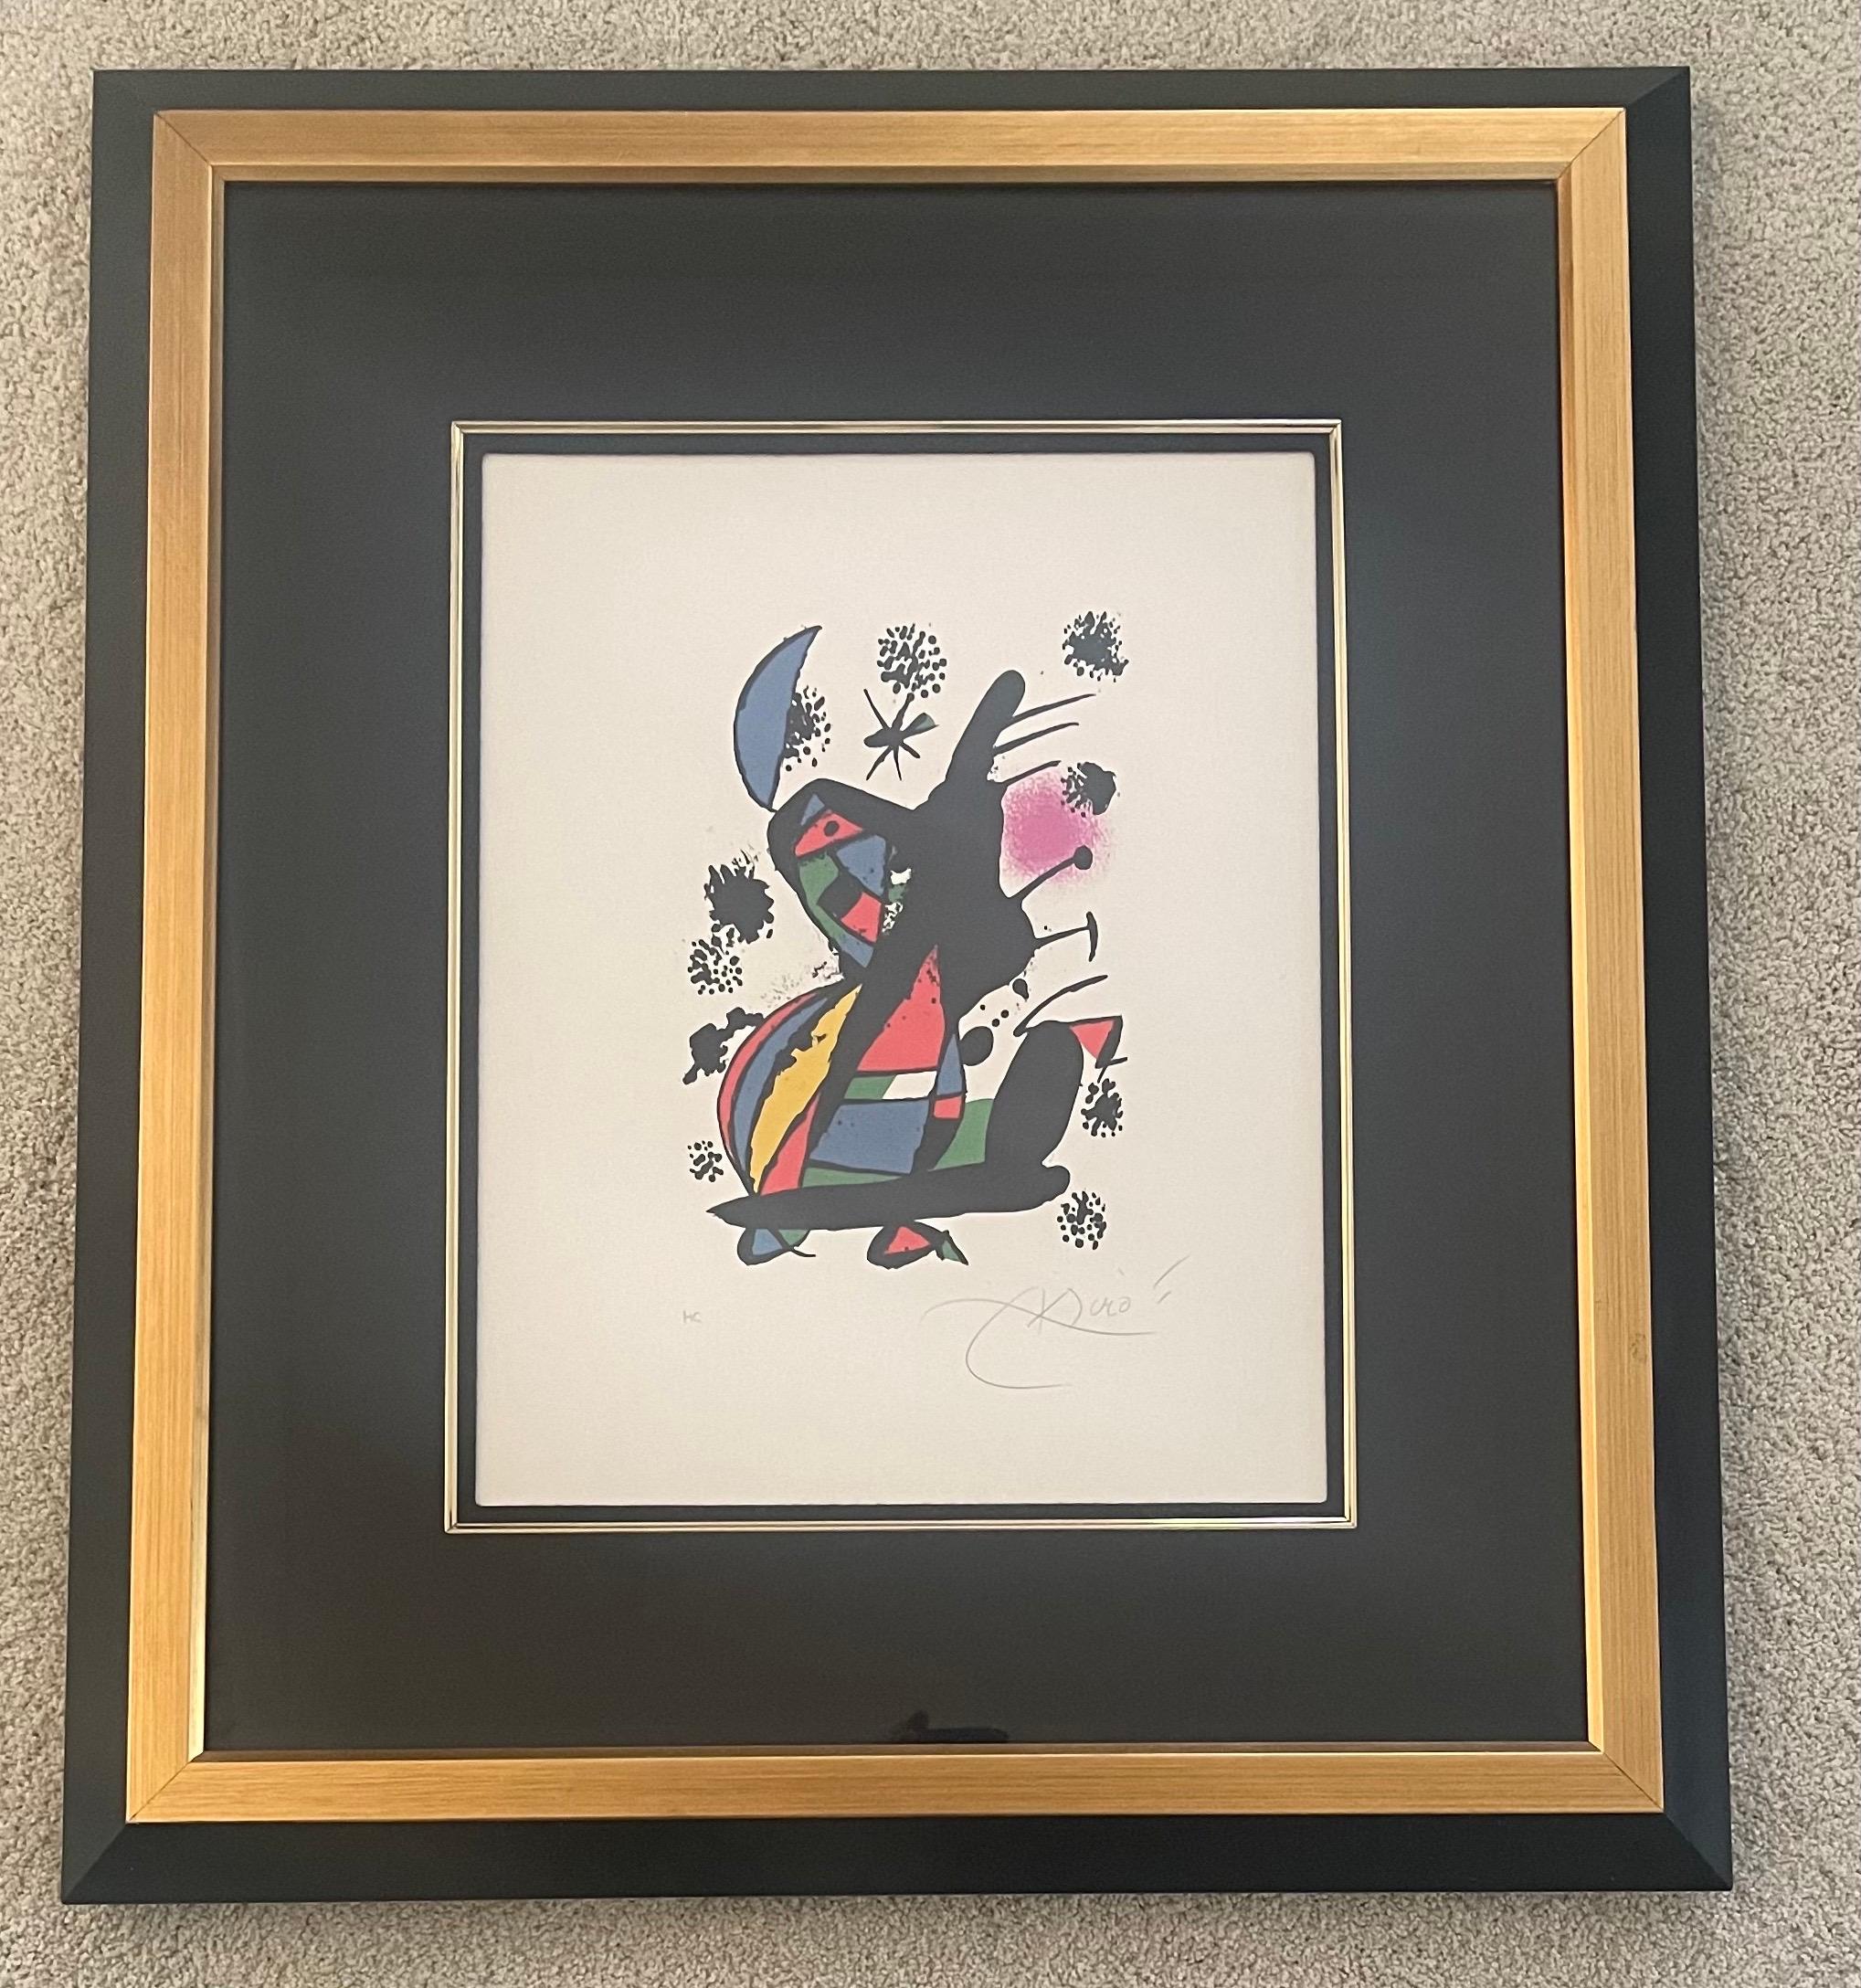 Nice abstract contemporary color lithograph signed by Joan Miró in the lower right, circa 1960s. The image is 13.5